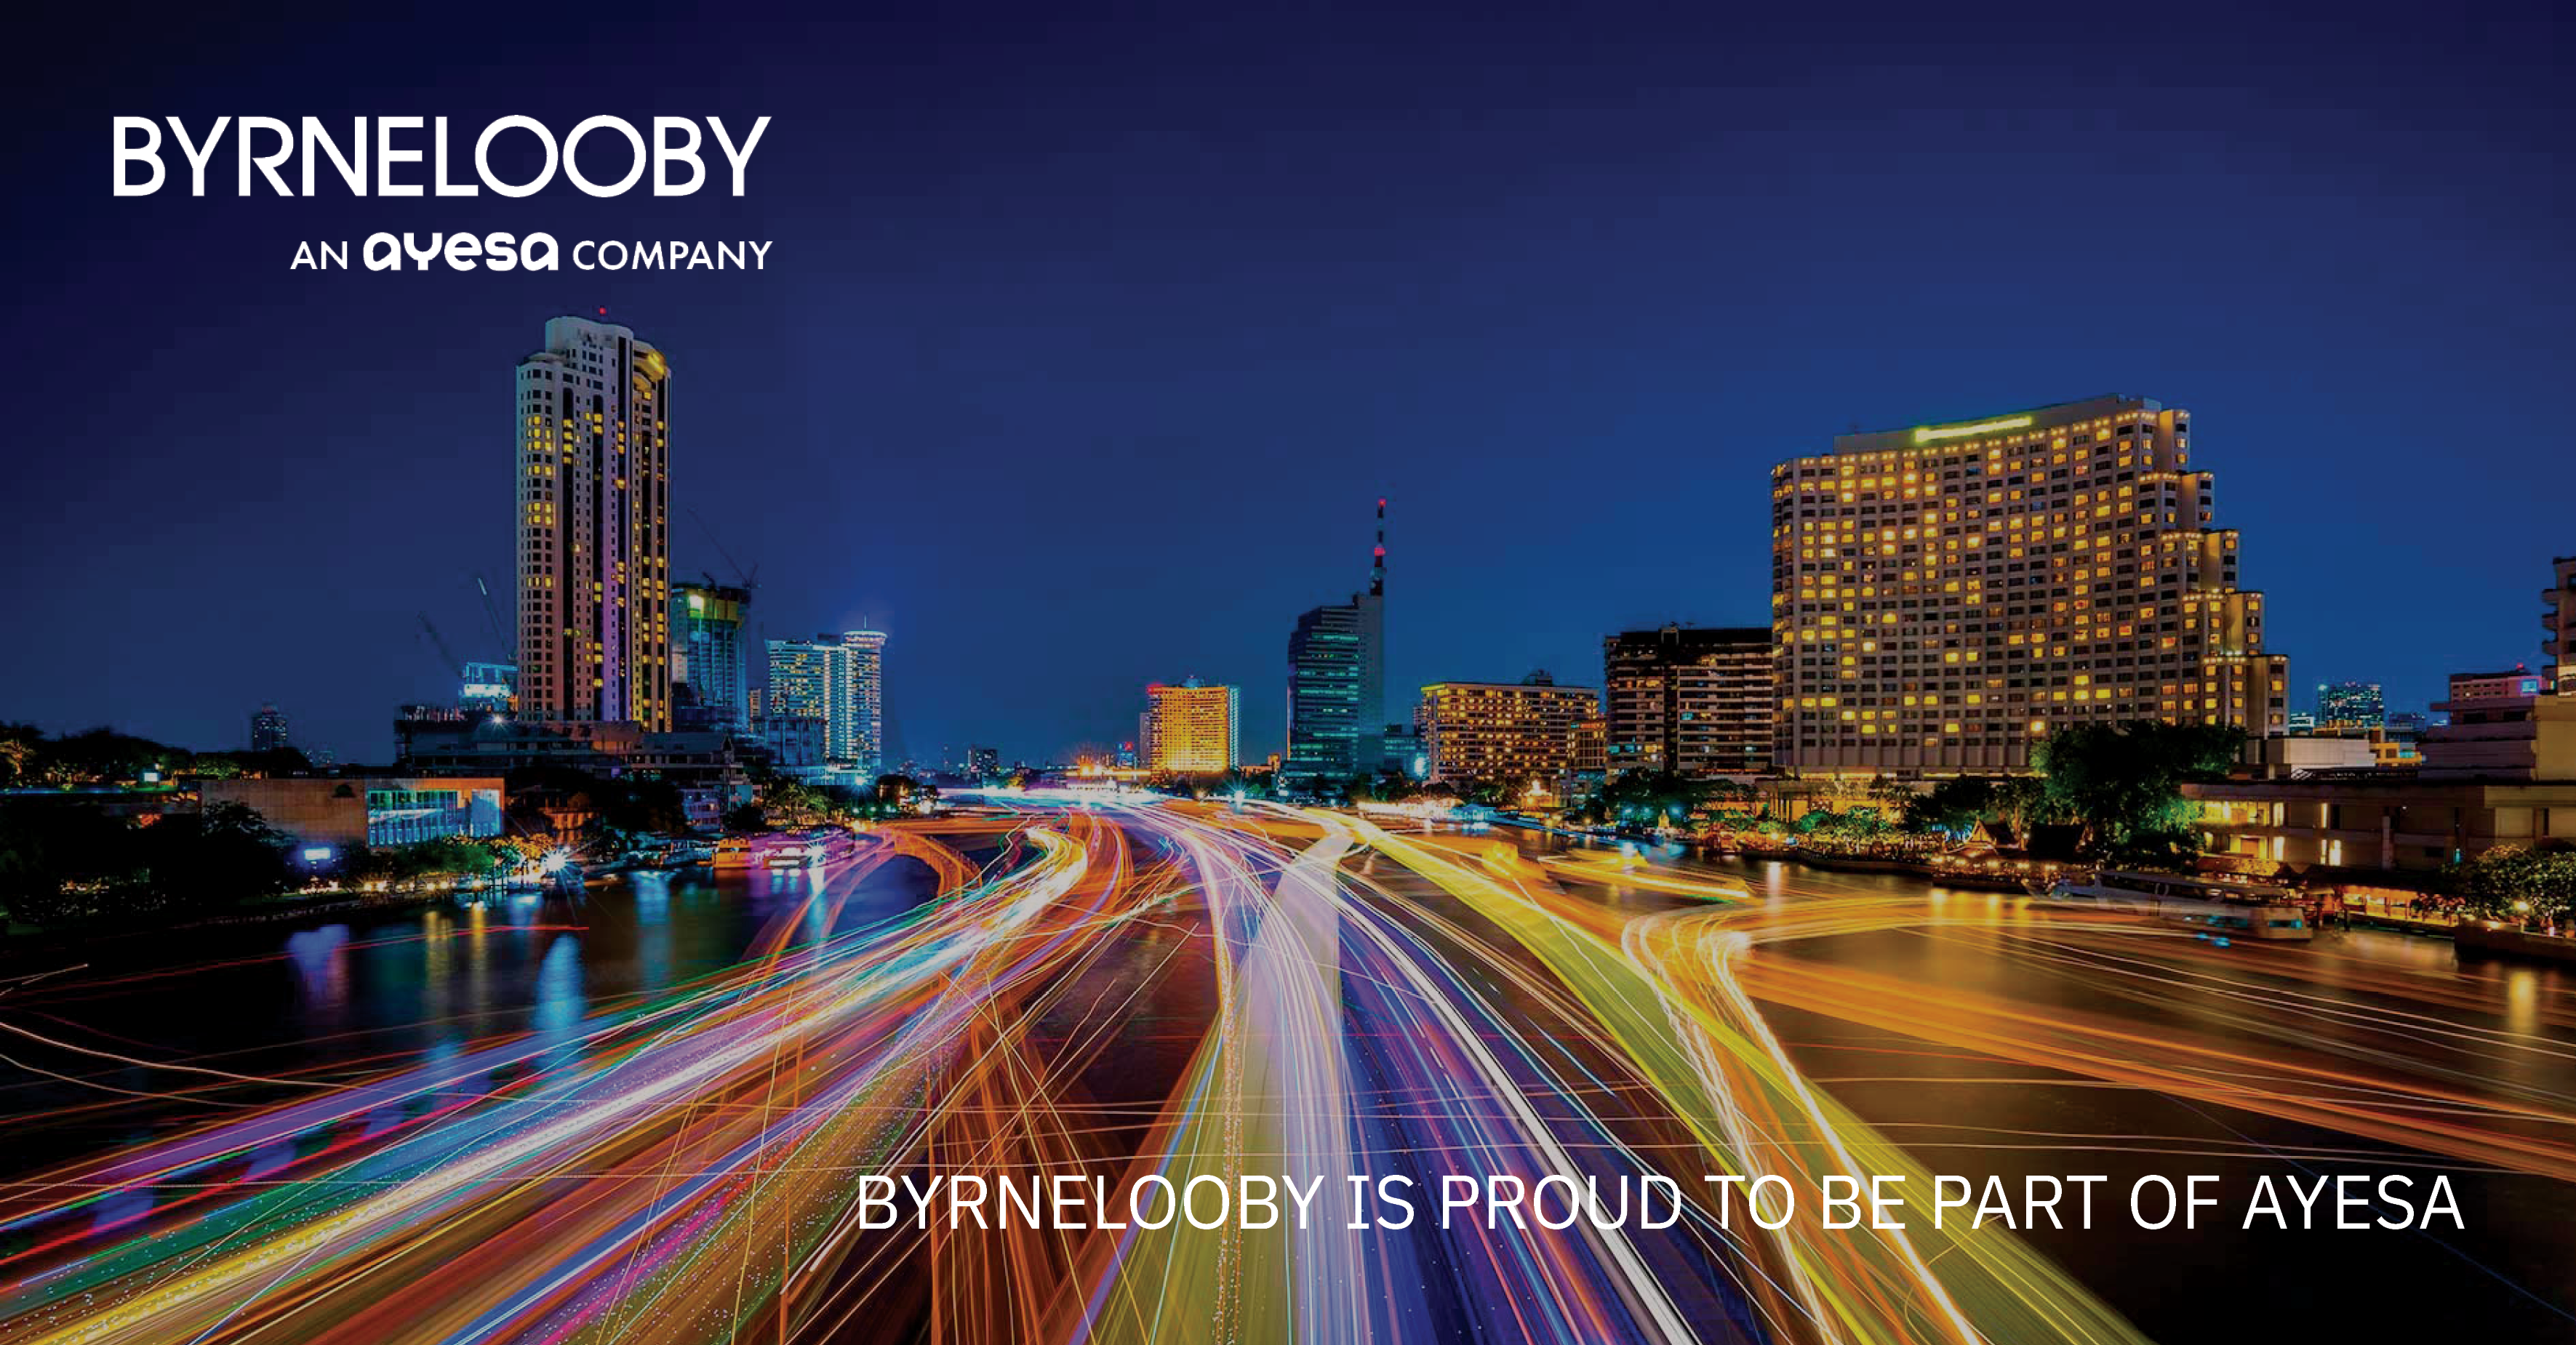 ByrneLooby acquired by global technology and engineering firm AYESA